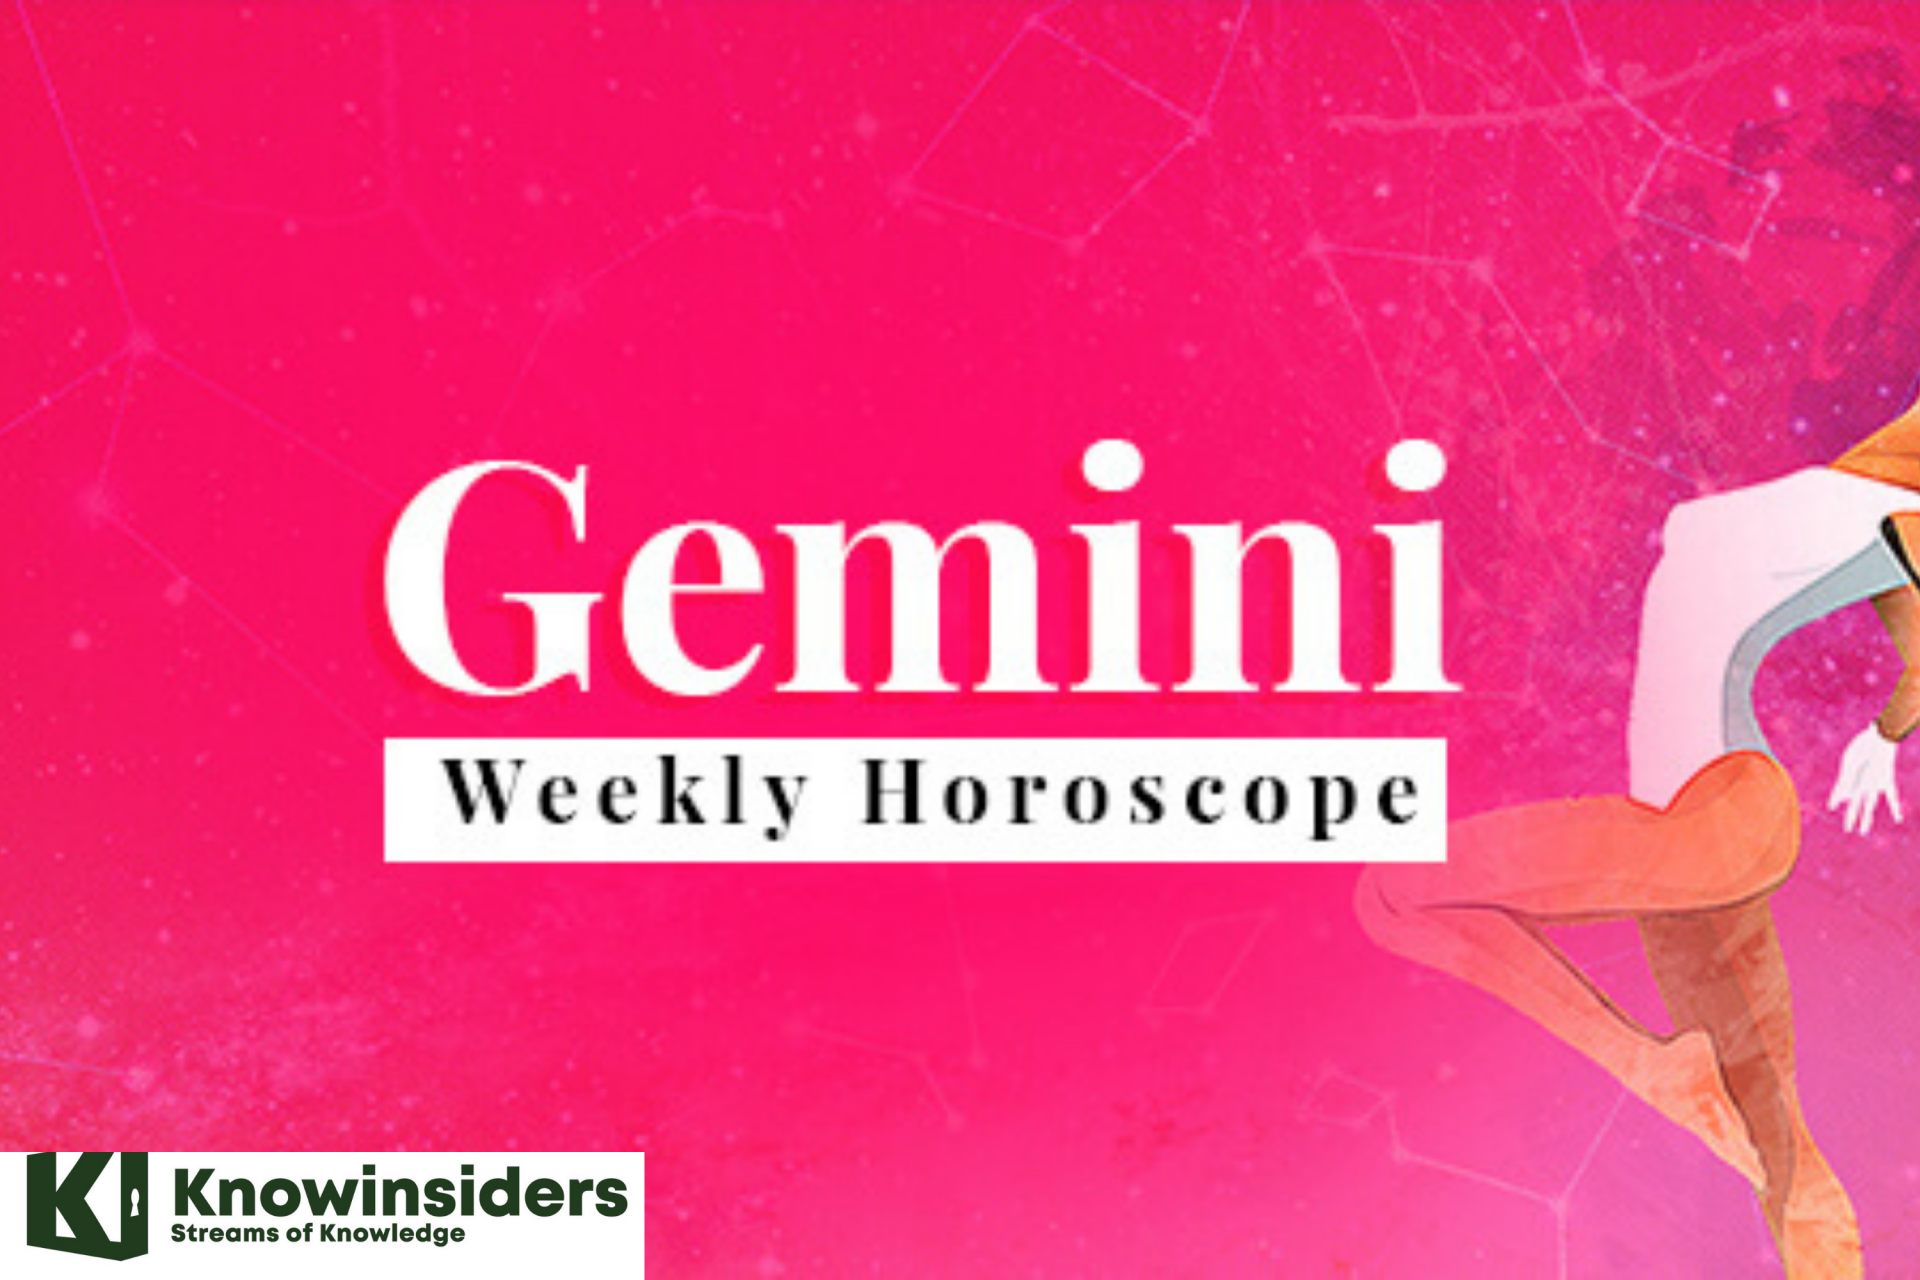 Gemini Weekly Horoscope (April 26 - May 2): Predictions for Love, Financial, Career and Health